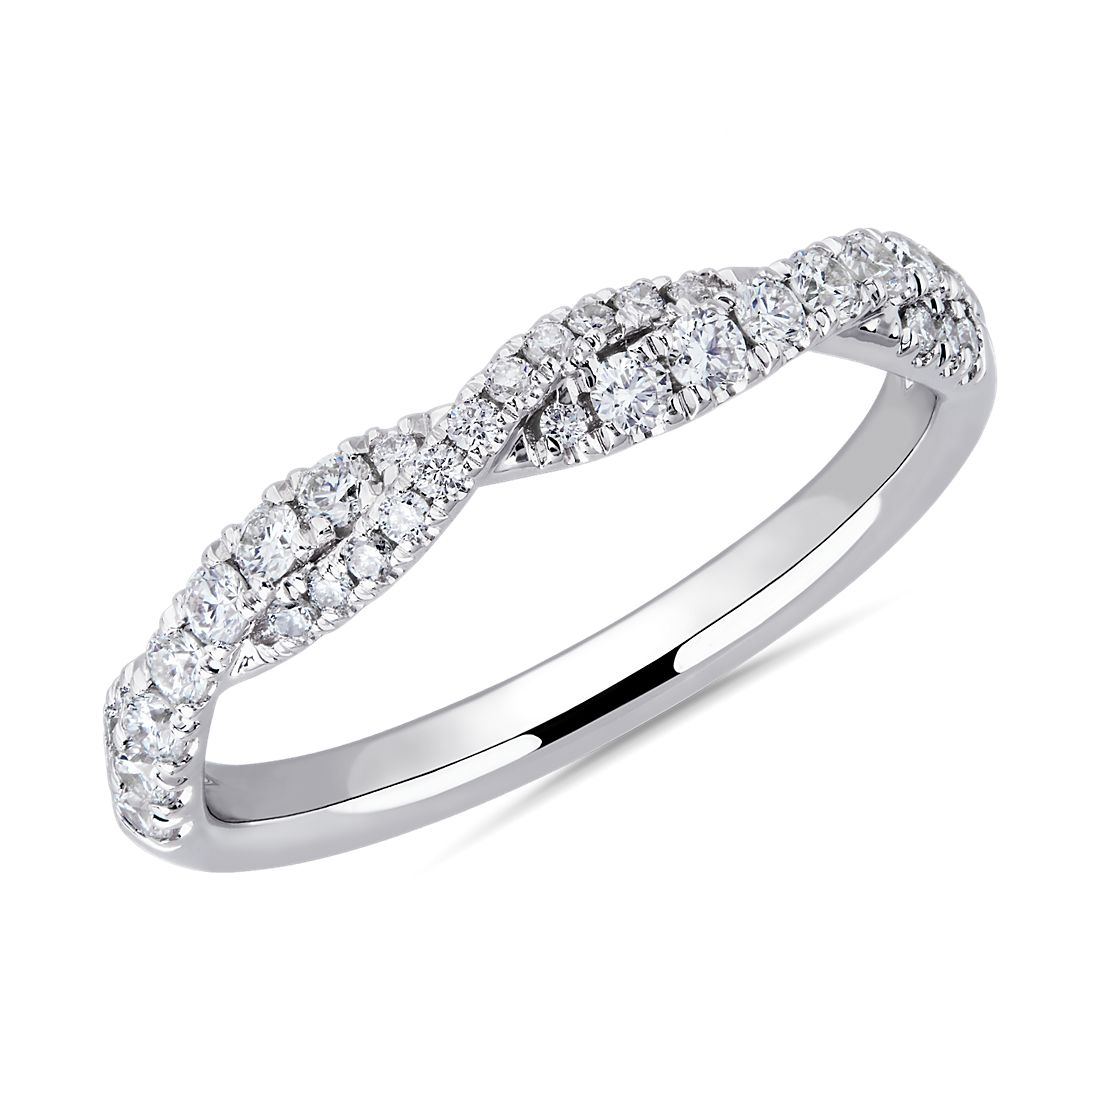 Overlapping Twist Diamond Ring in 14k White Gold (1/3 ct. tw.)